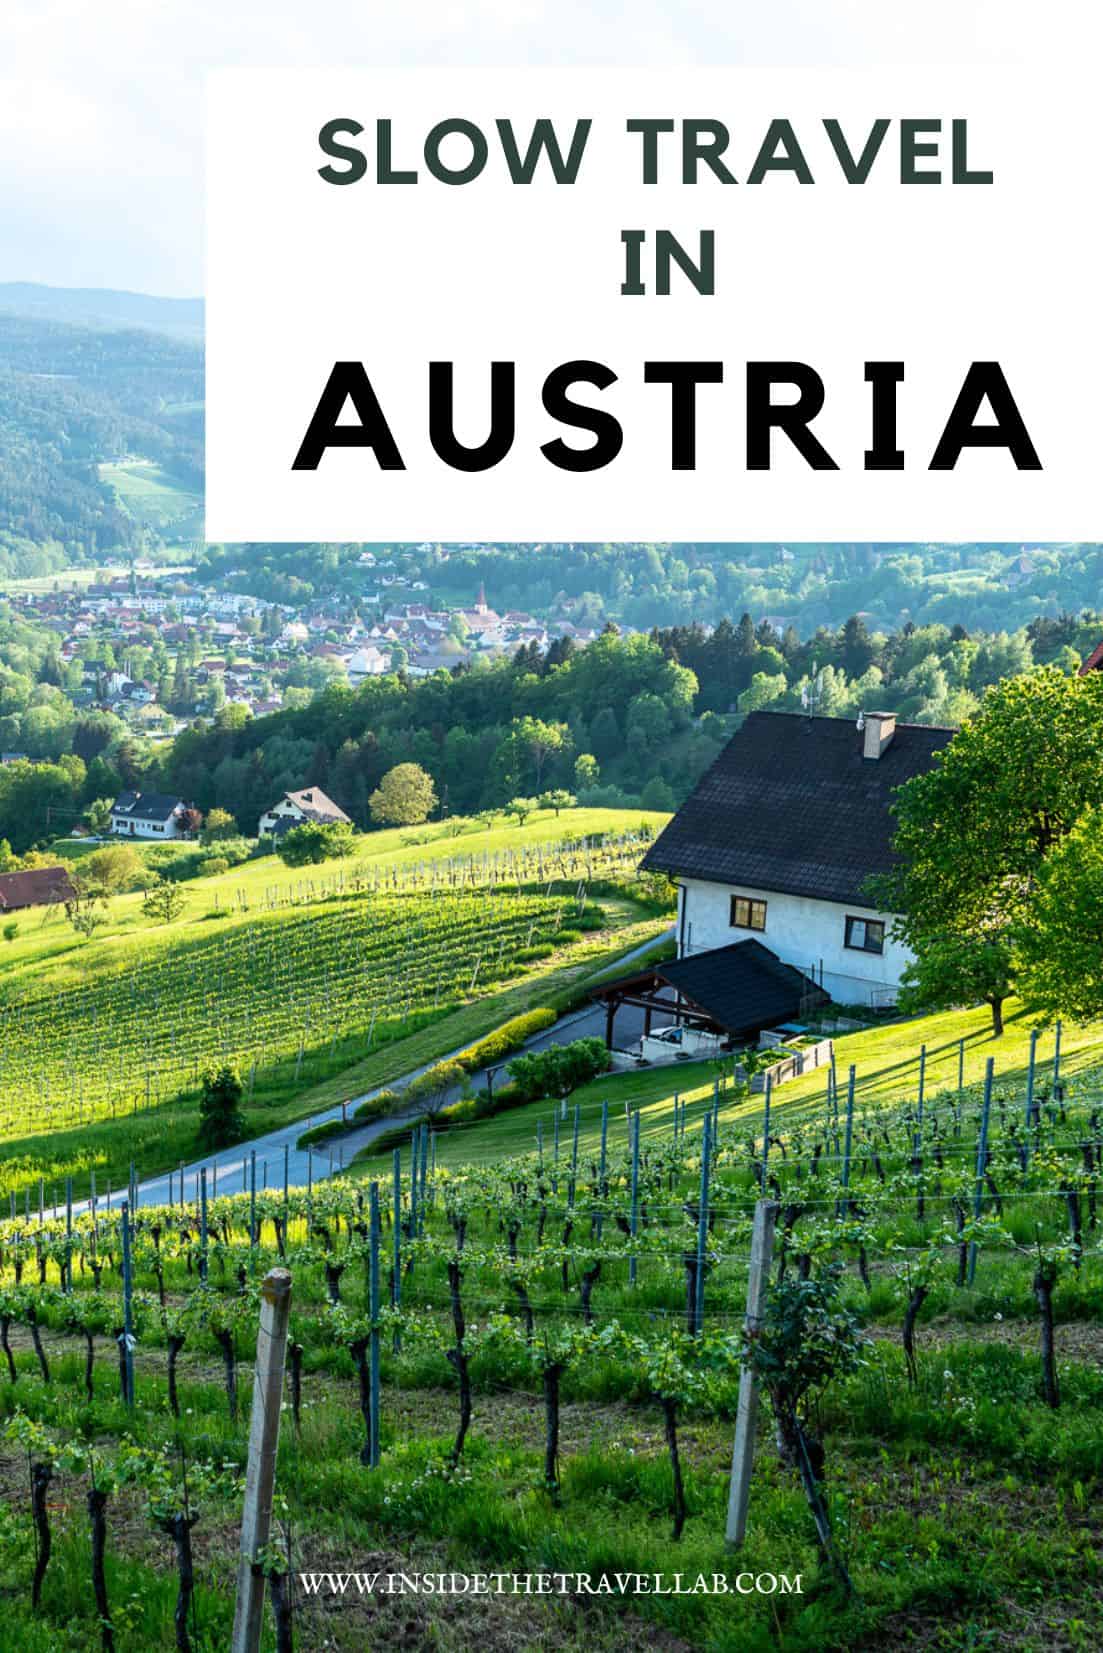 Slow travel in Austria cover image